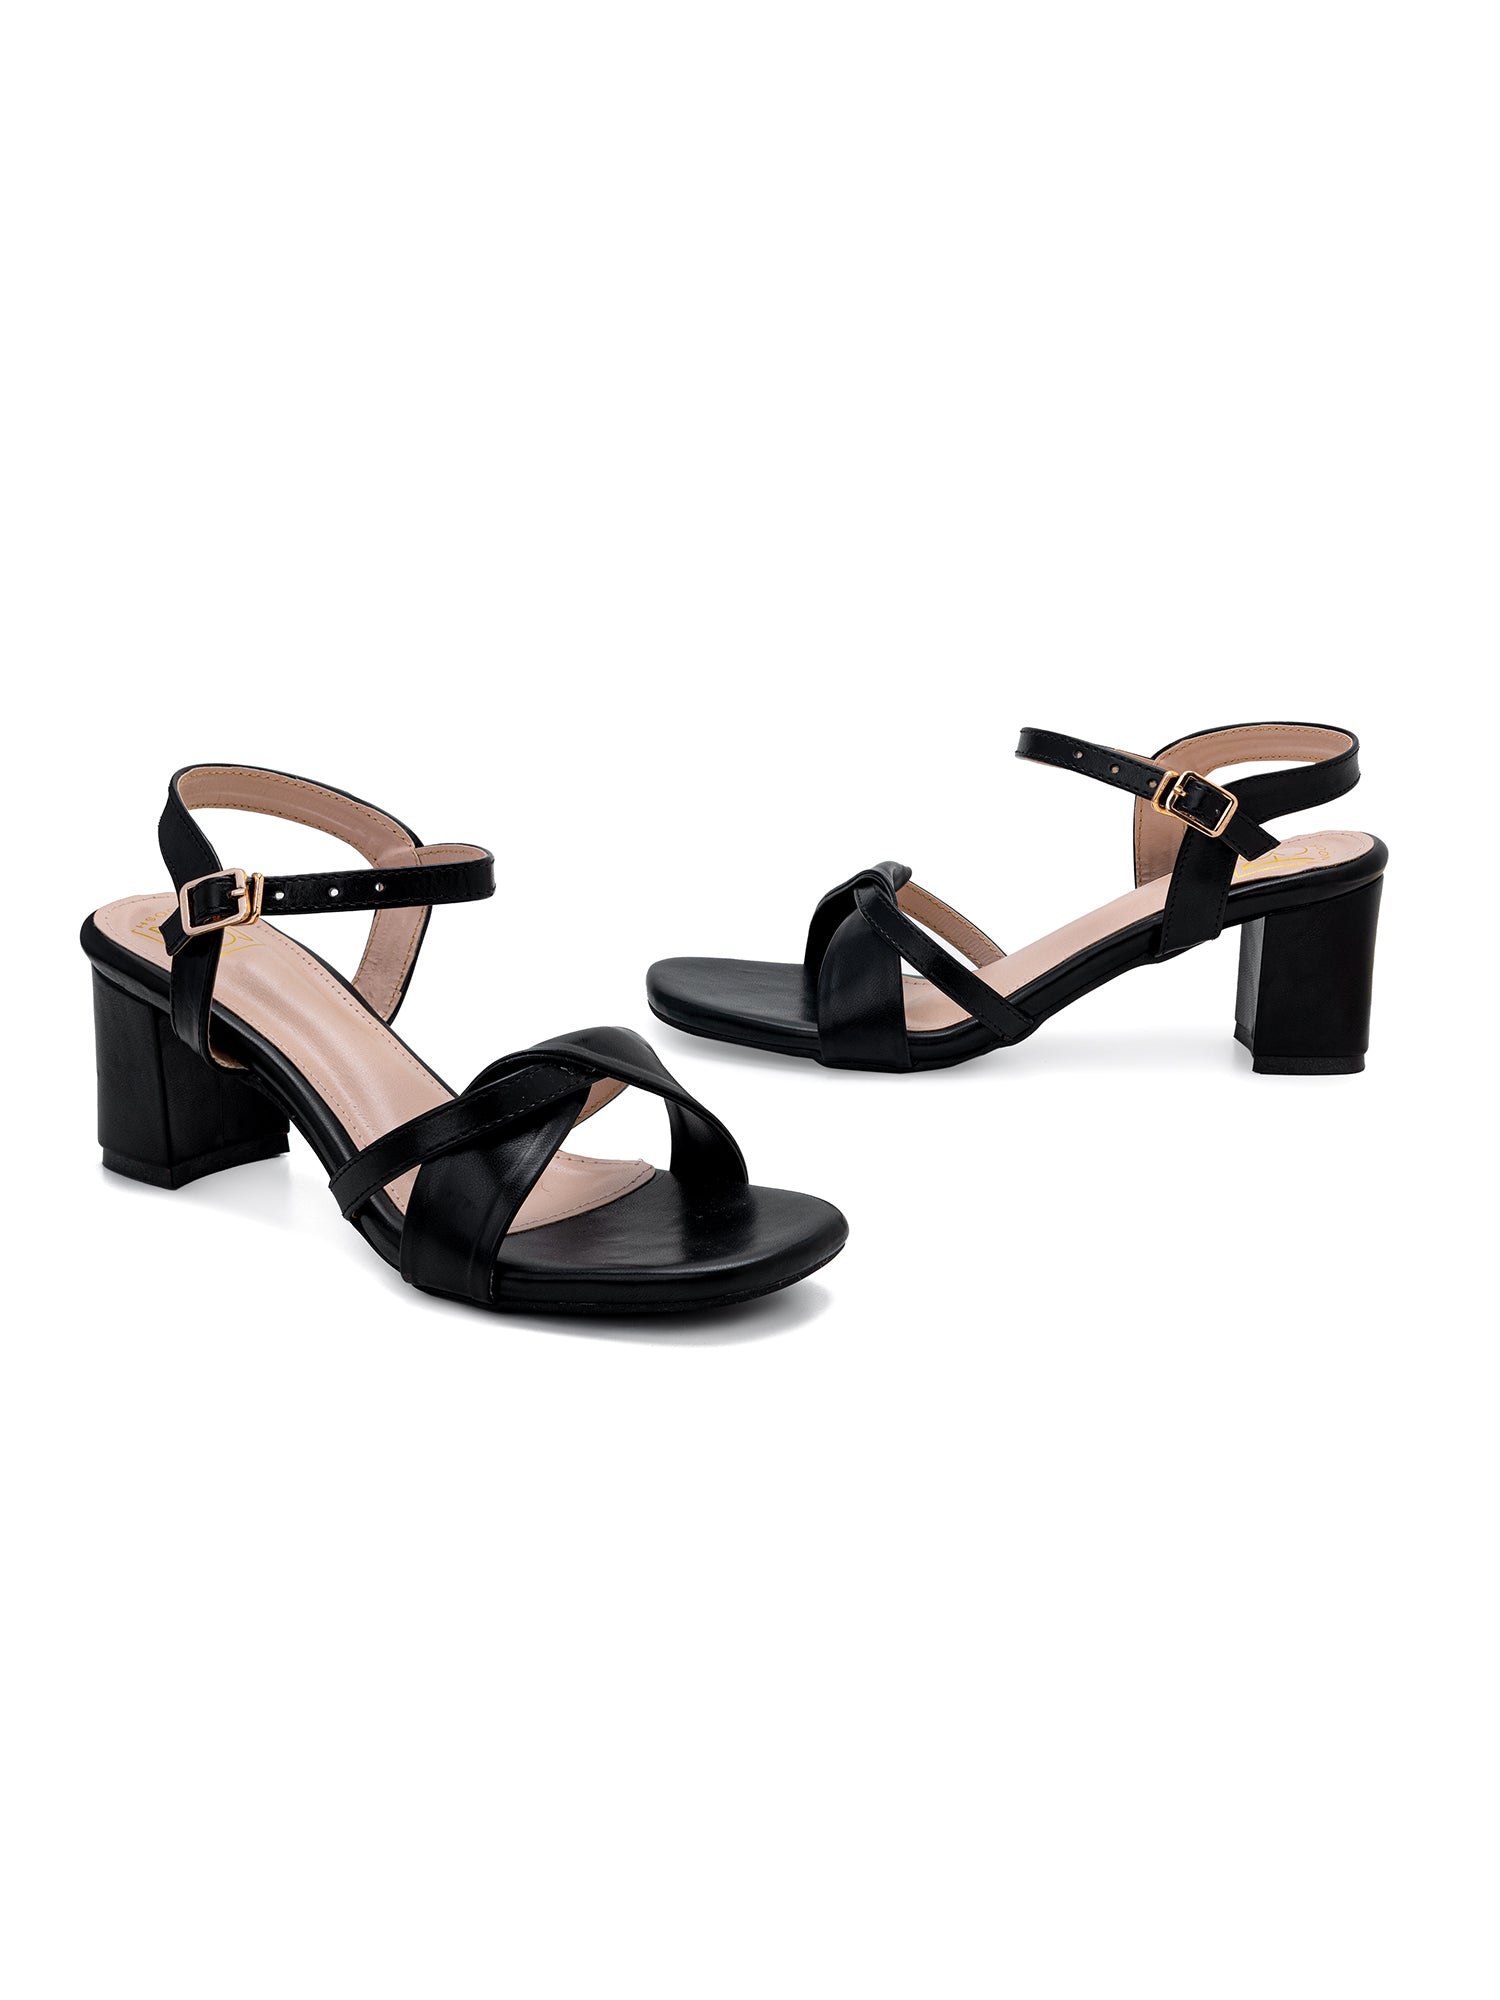 Womens Block Heels Round Toe Buckle Mary Jane Shoes Patent Leather Ankle  Strap | eBay